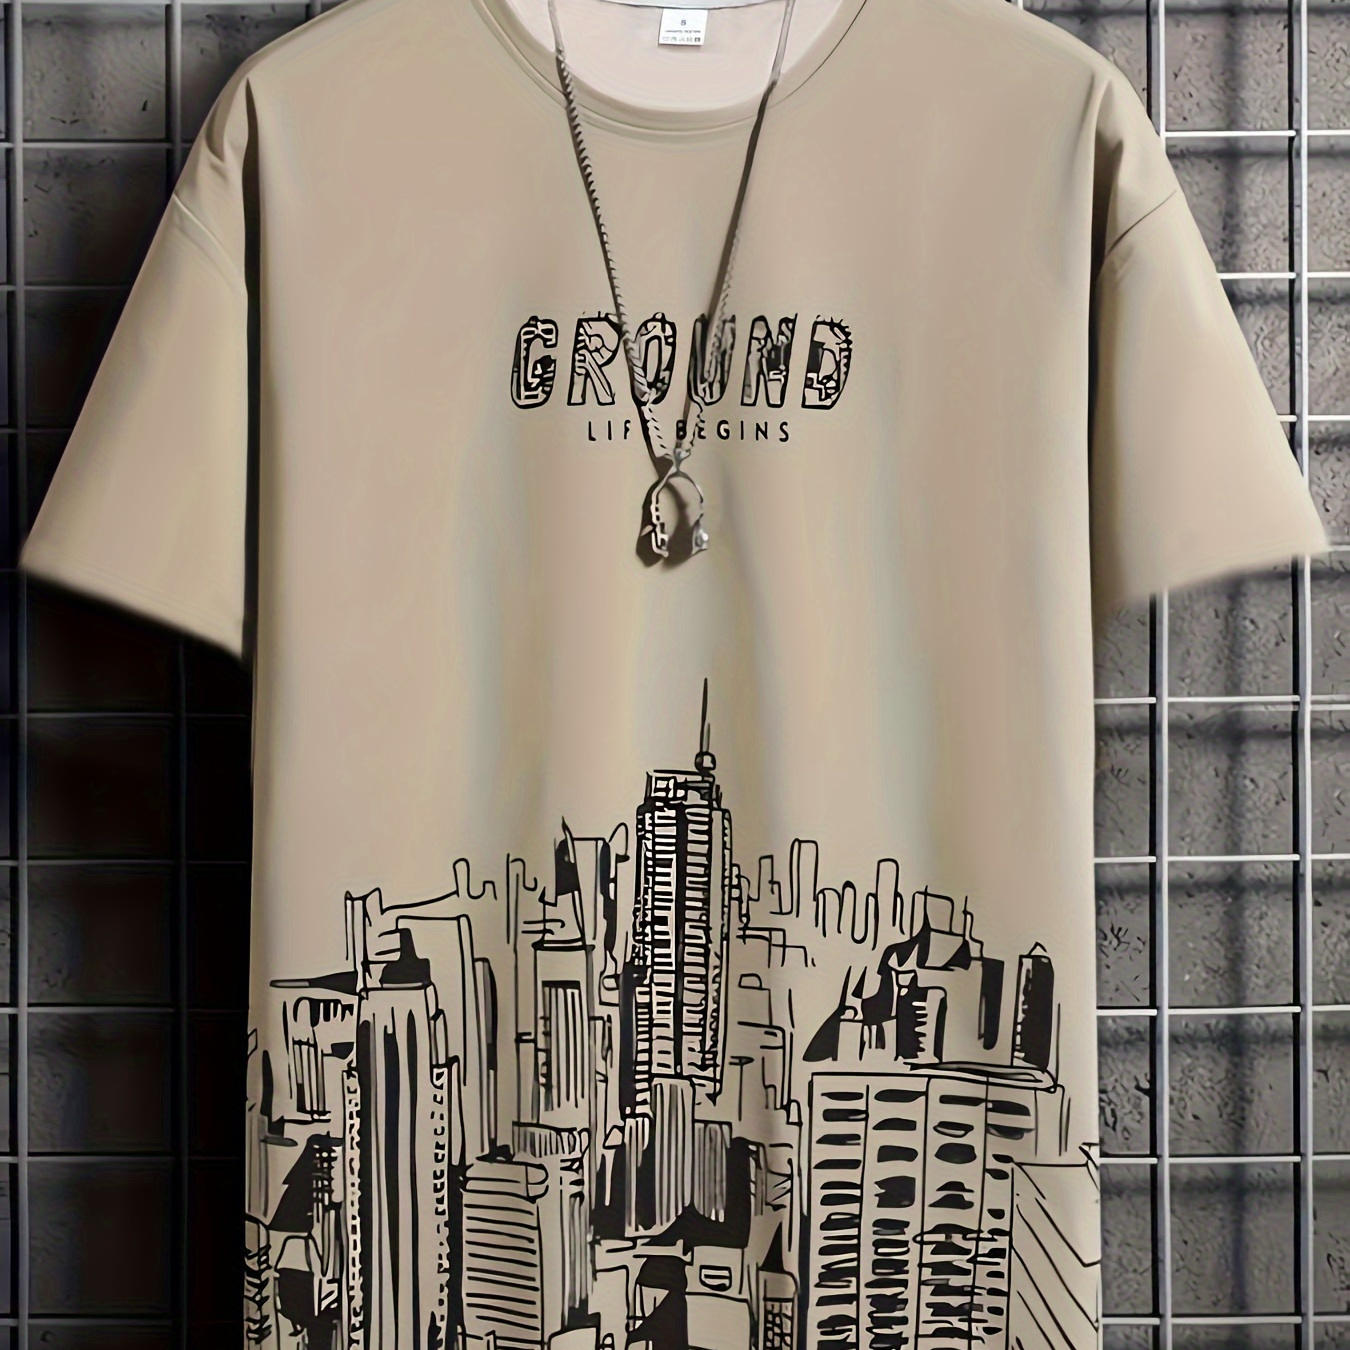 

Men's Stylish Buildings Pattern Shirt, Casual Breathable Crew Neck Short Sleeve Tee Top For City Walk Street Hanging Outdoor Activities